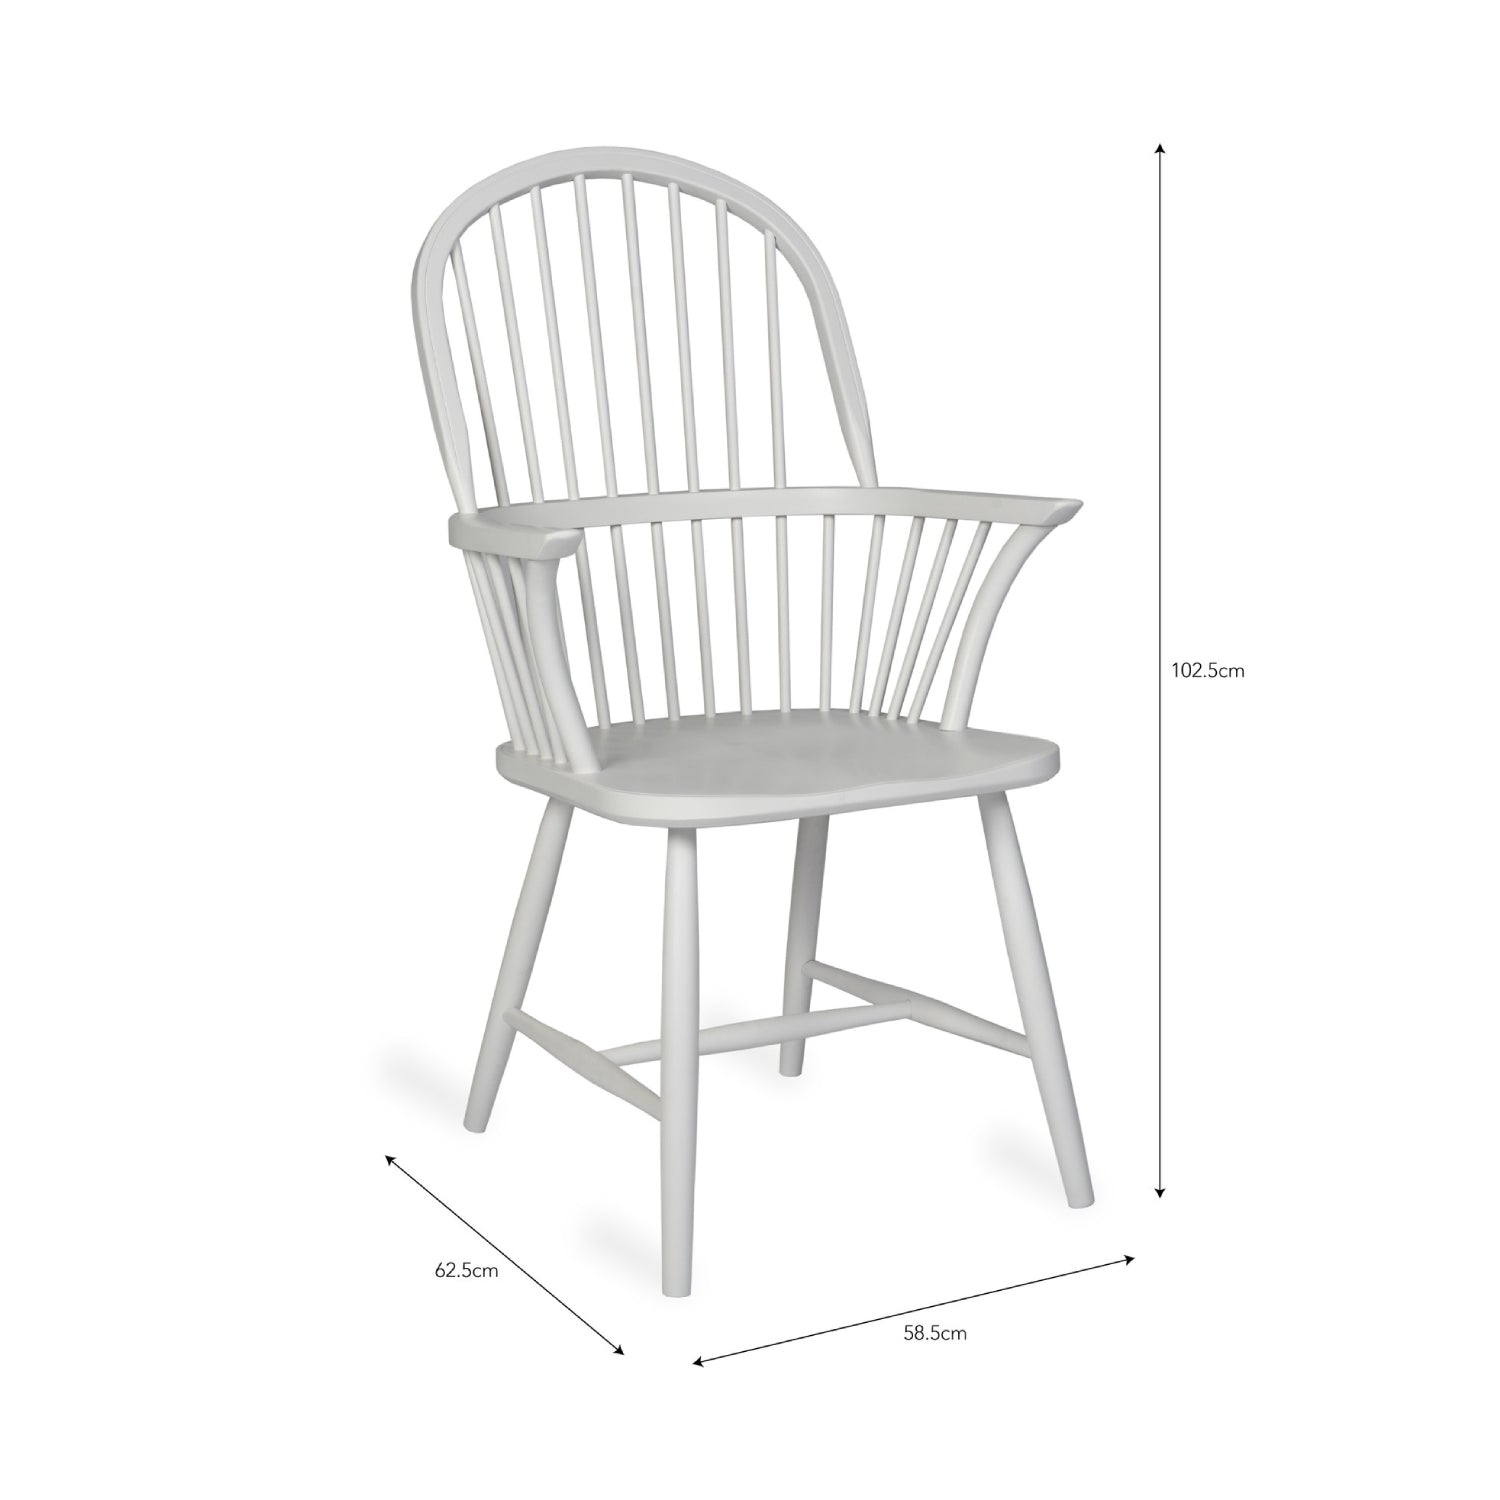 Spindle Armchair in Lily White by Garden Trading